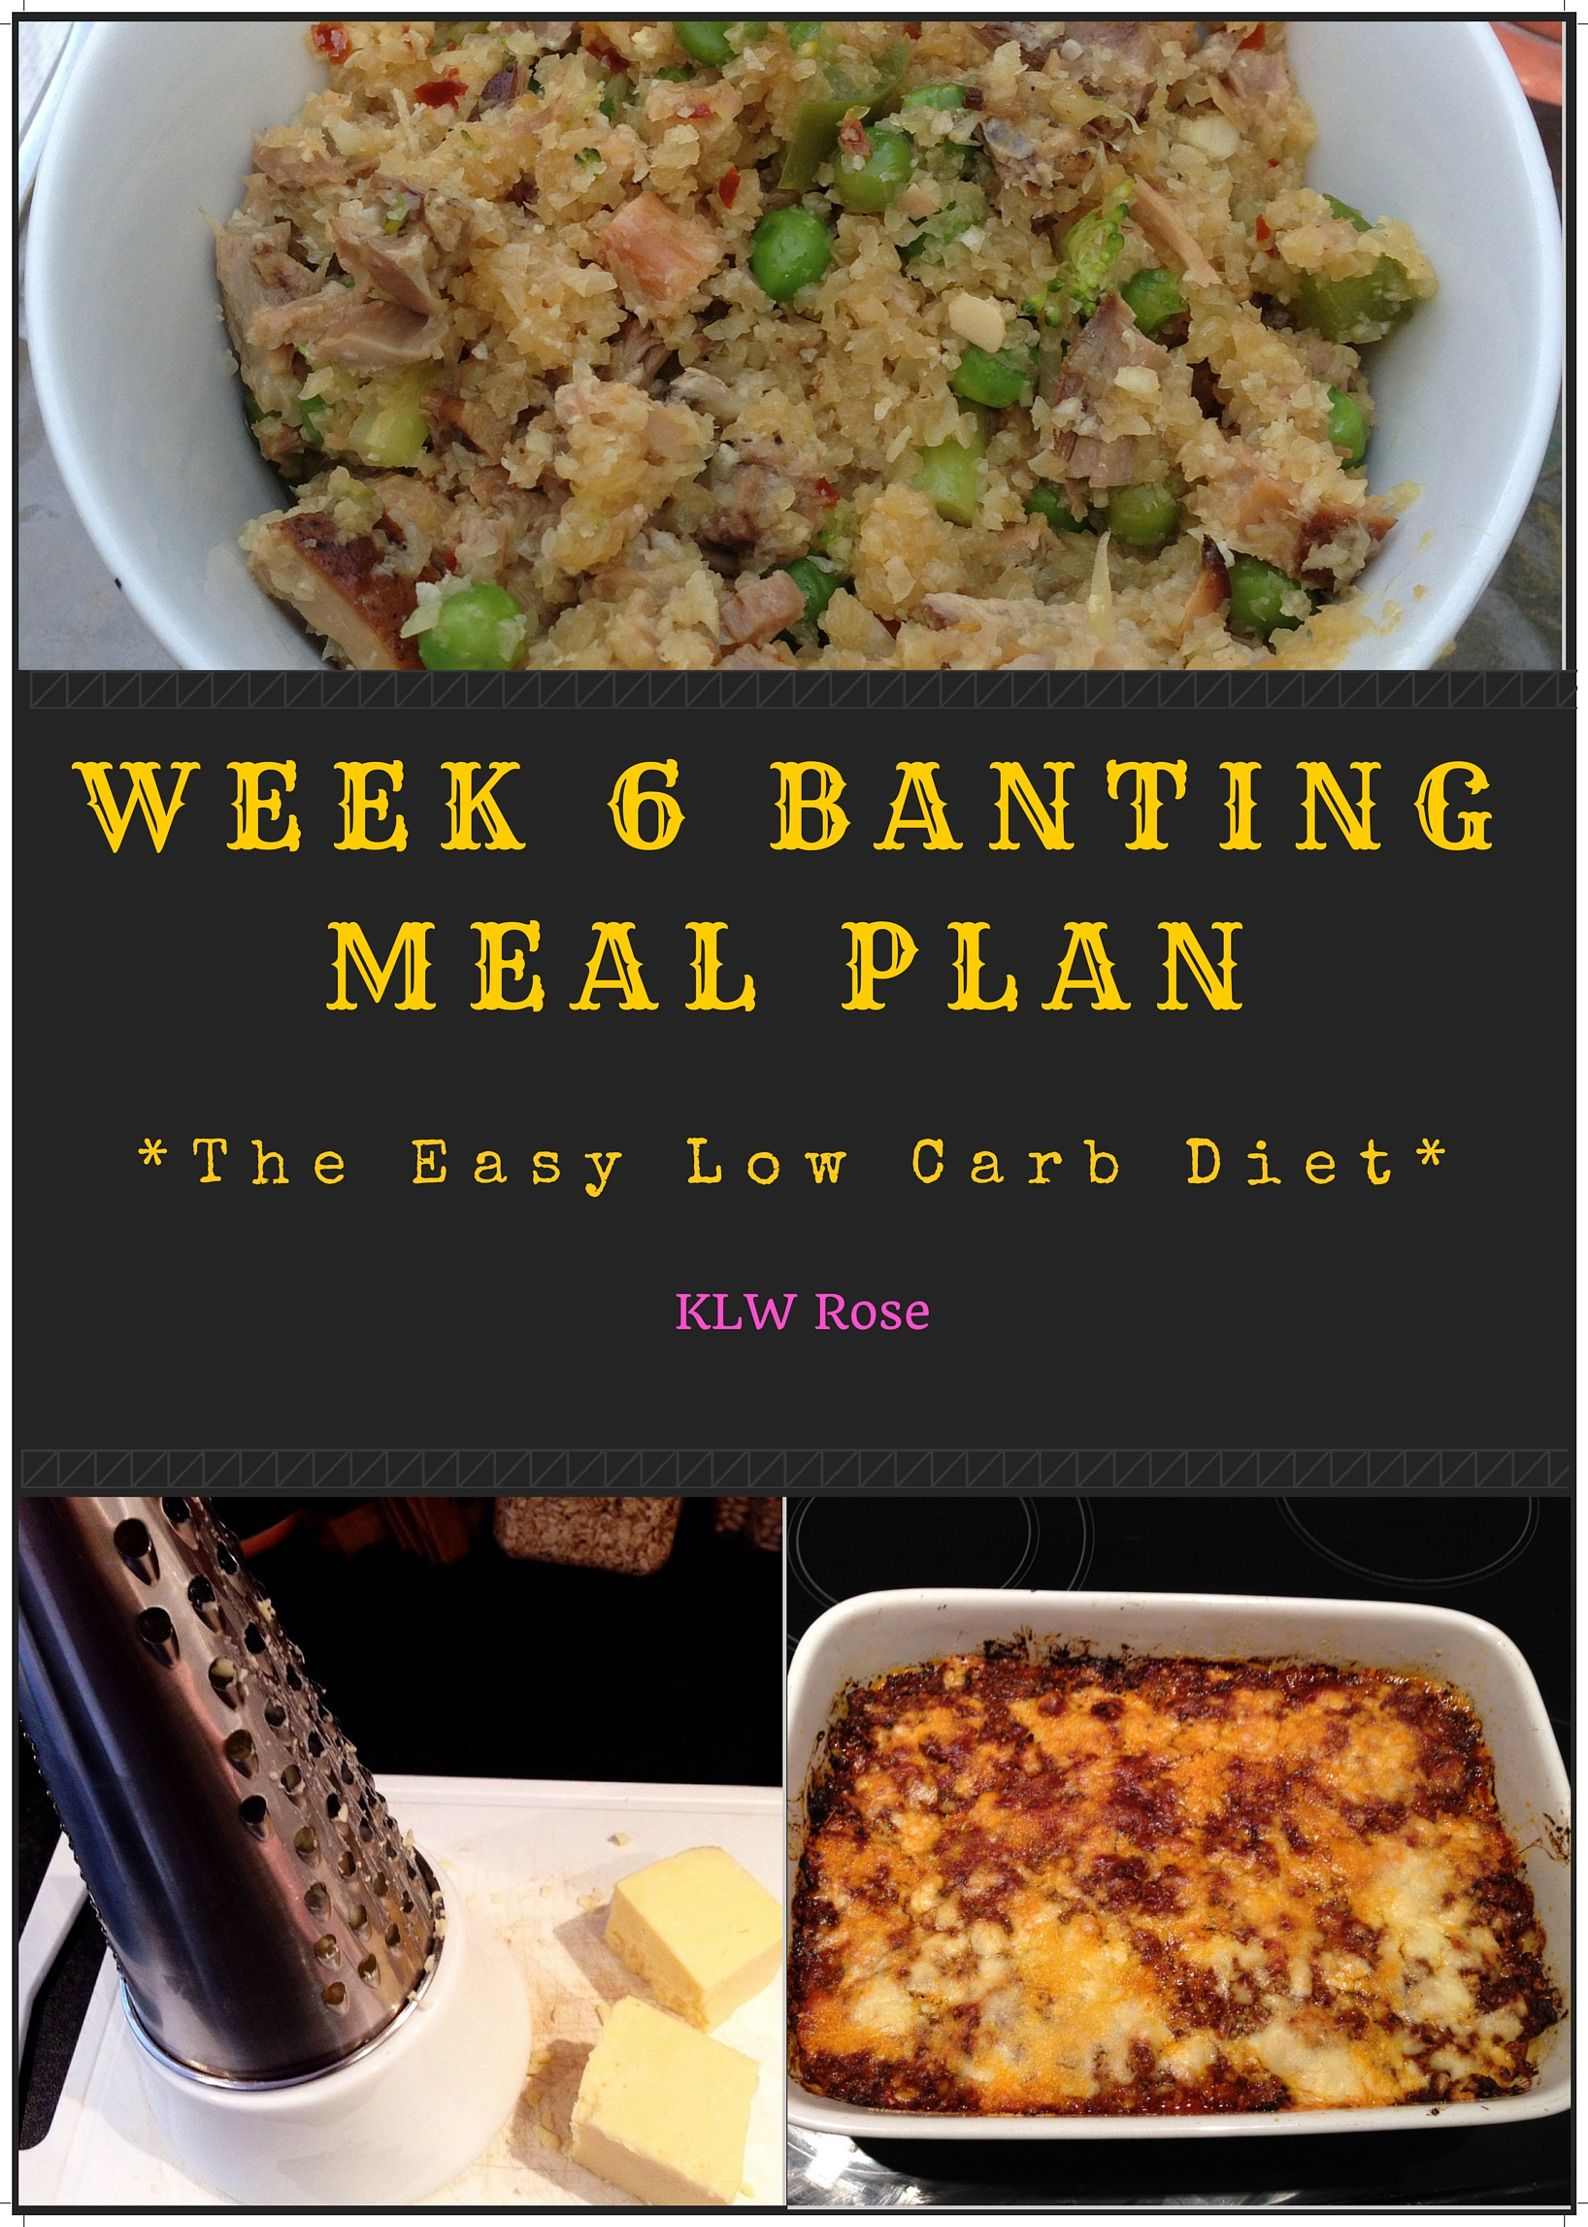 Week 6 Banting Meal Plan The Easy Low Carb Diet Meal Planning Meals 